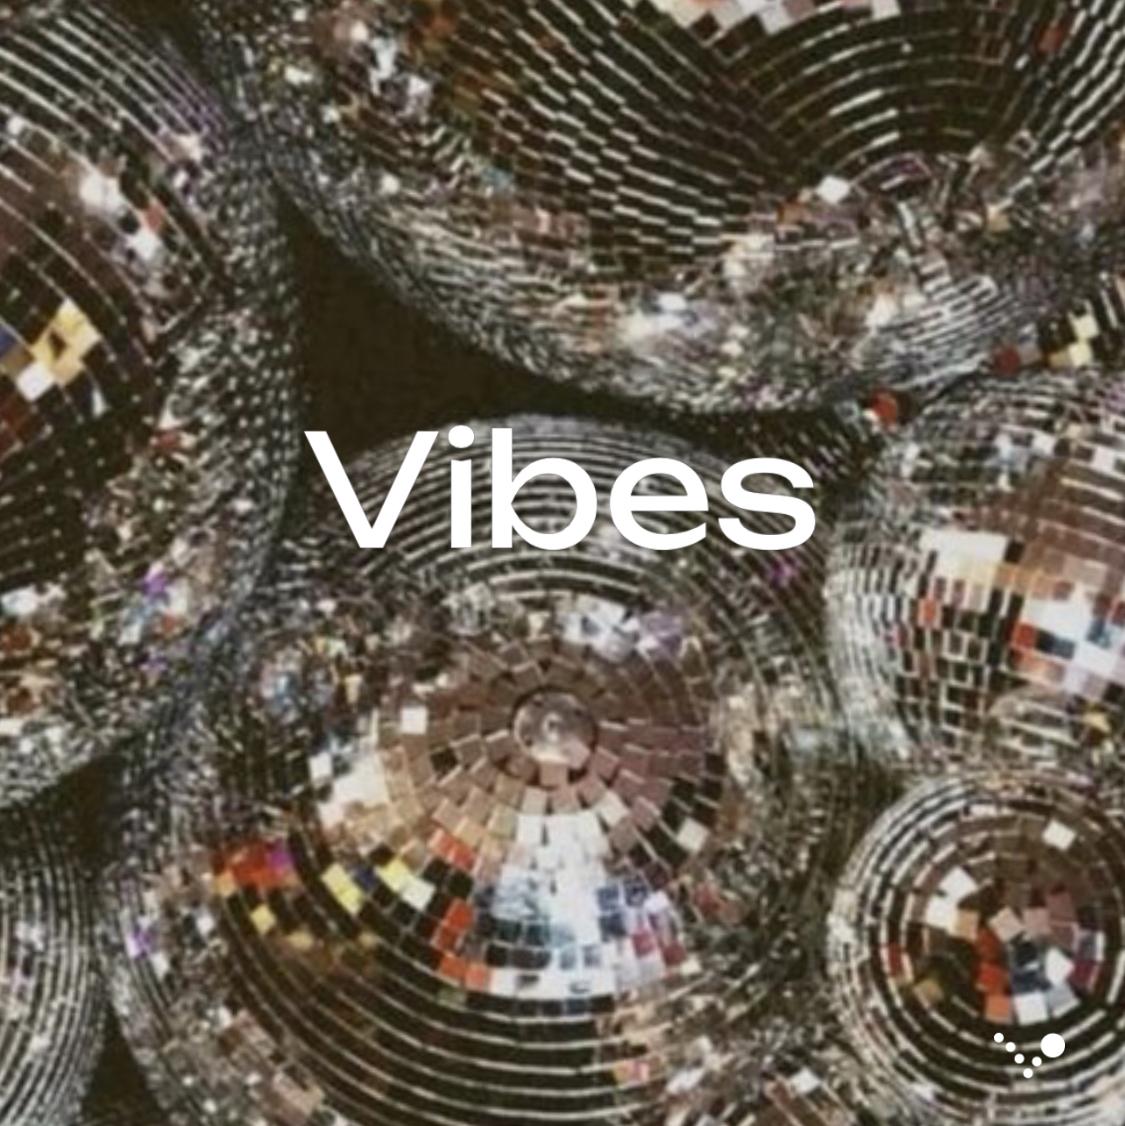 Vibes's images